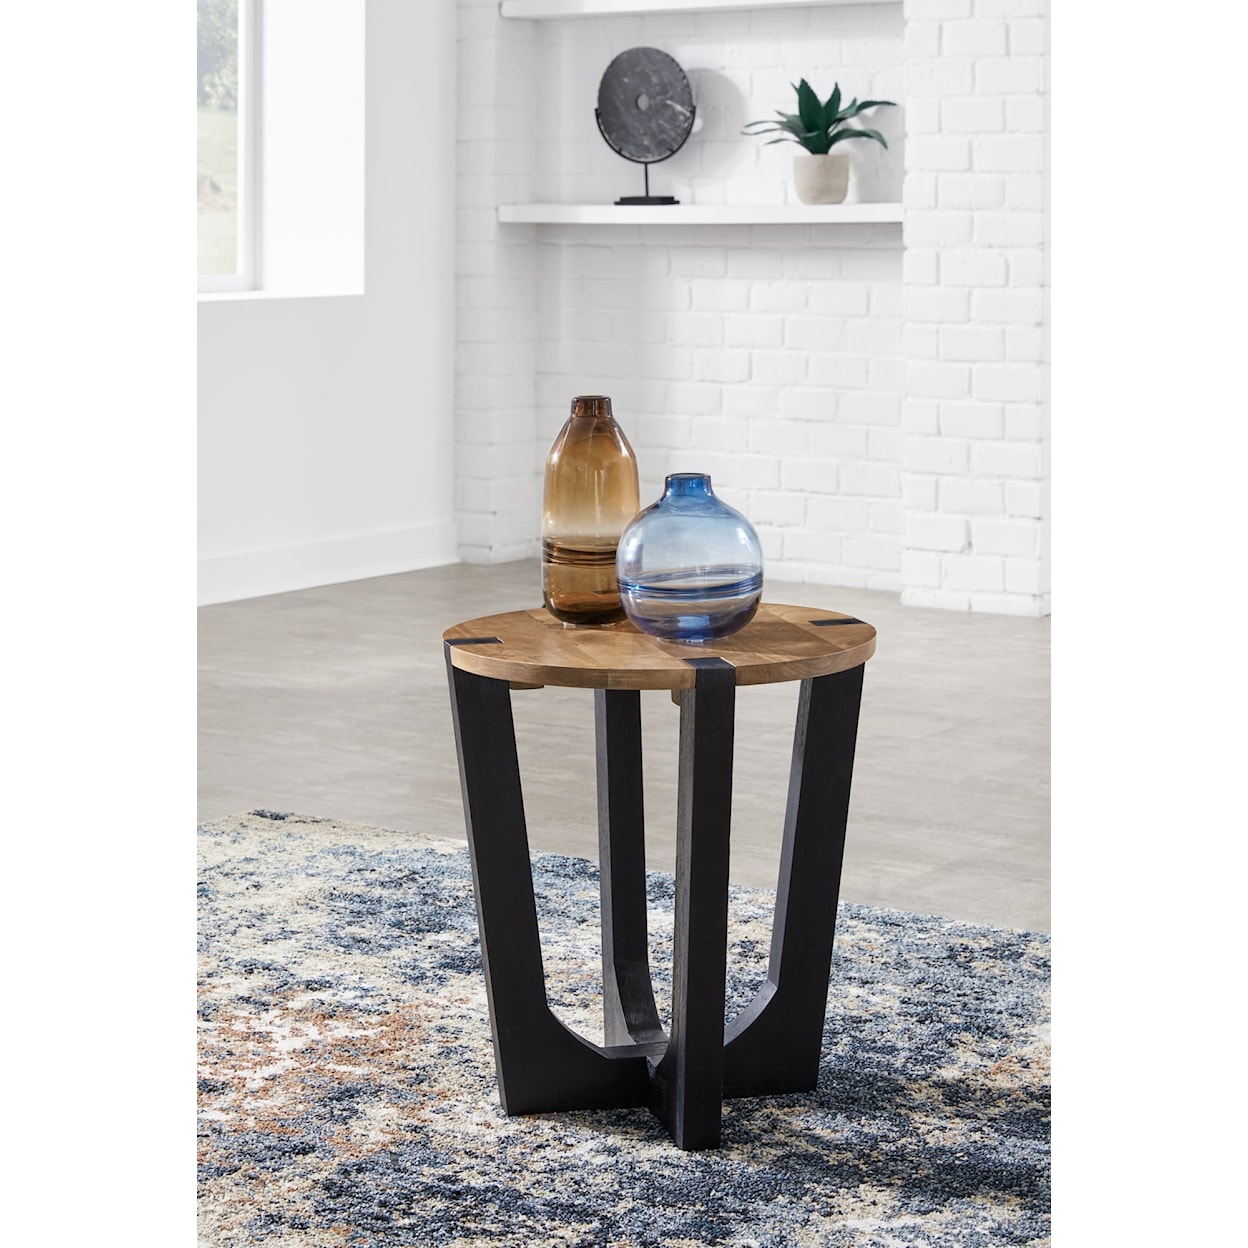 Signature Hanneforth Round End Table